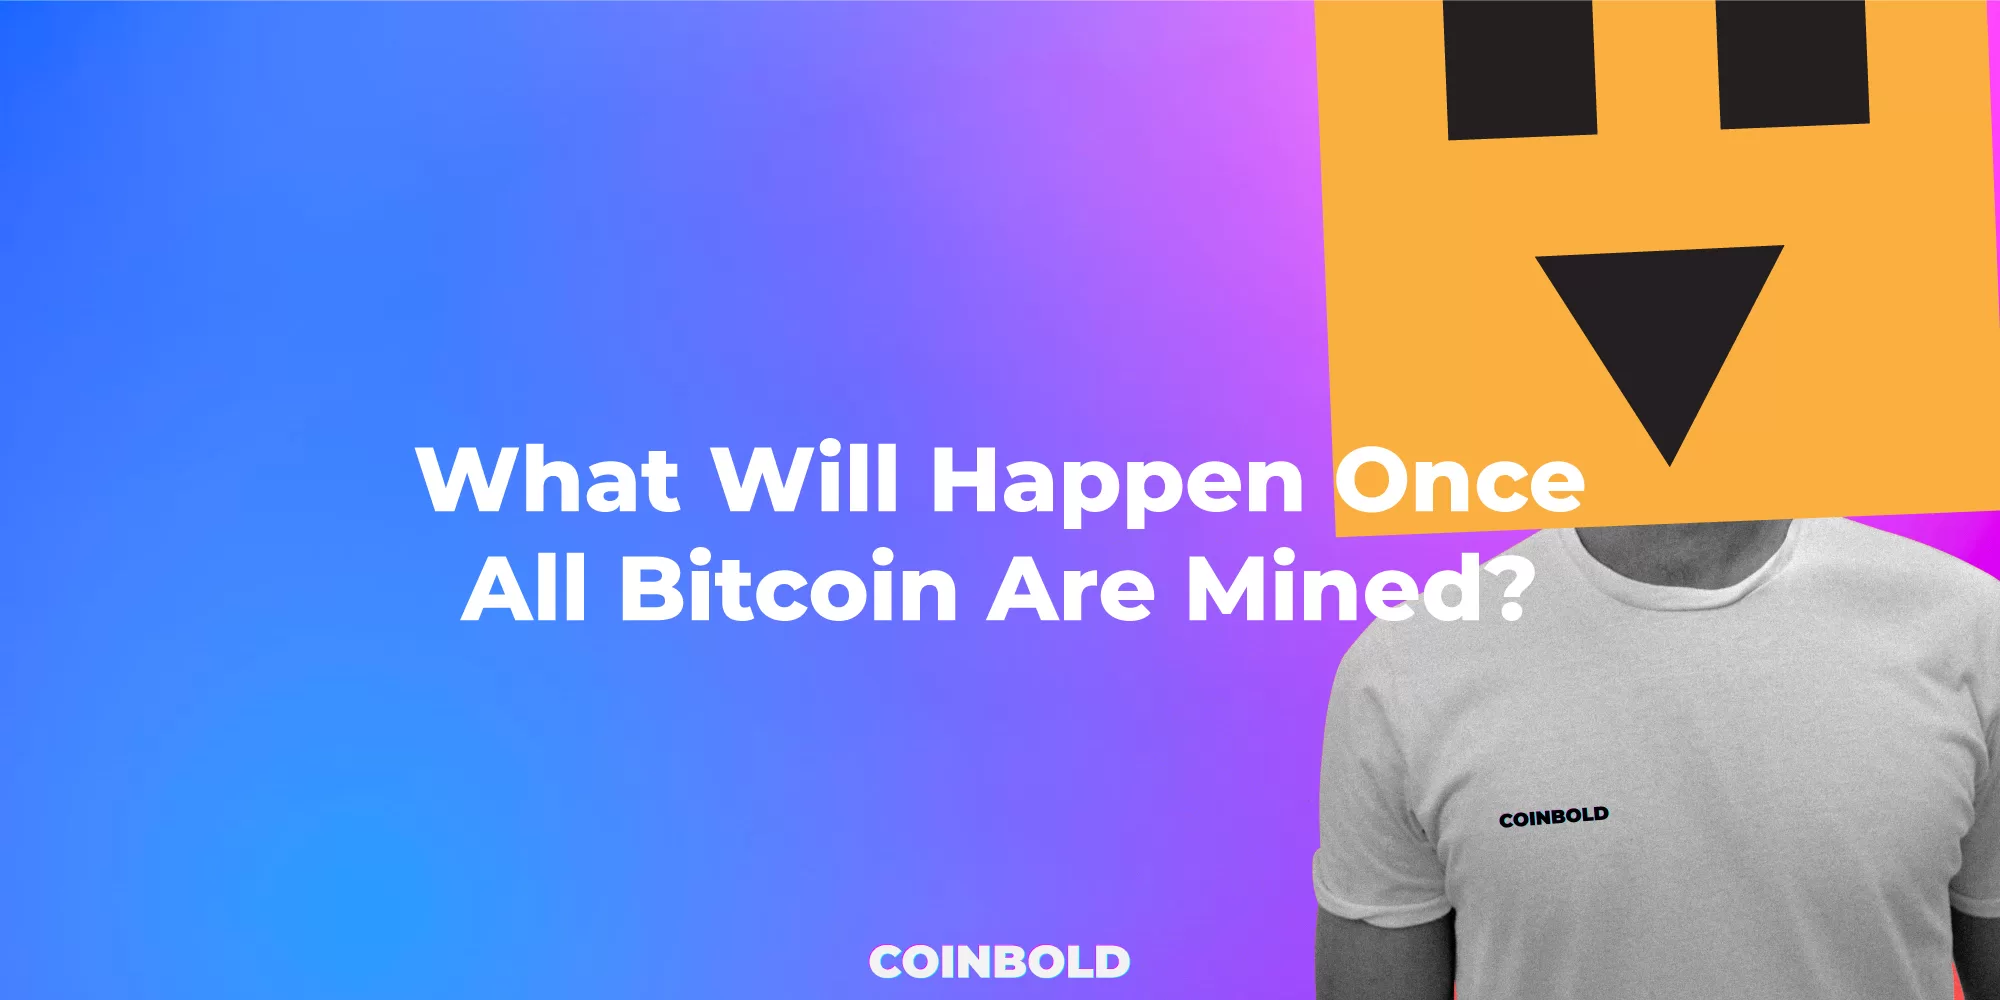 What Will Happen Once All Bitcoin Are Mined?